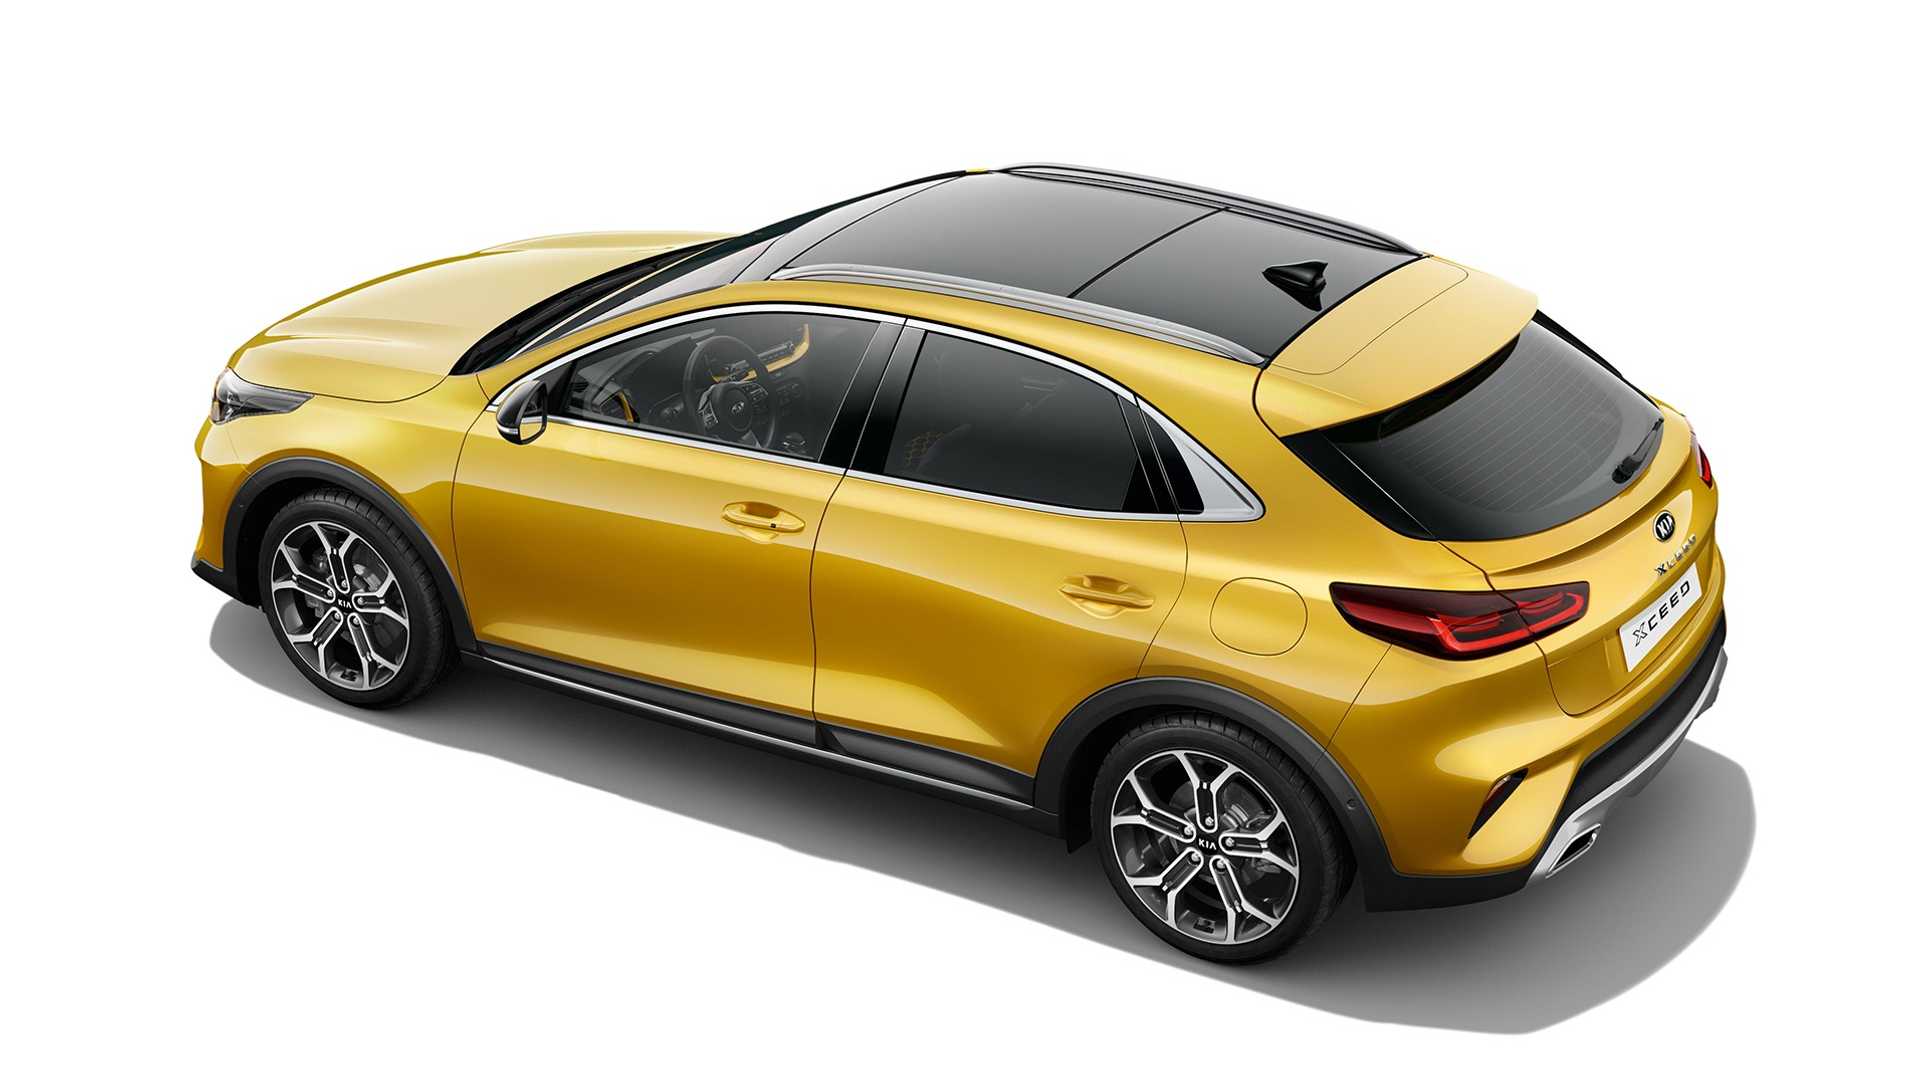 Kia Xceed Debuts As Stylish Pact Crossover For Europe